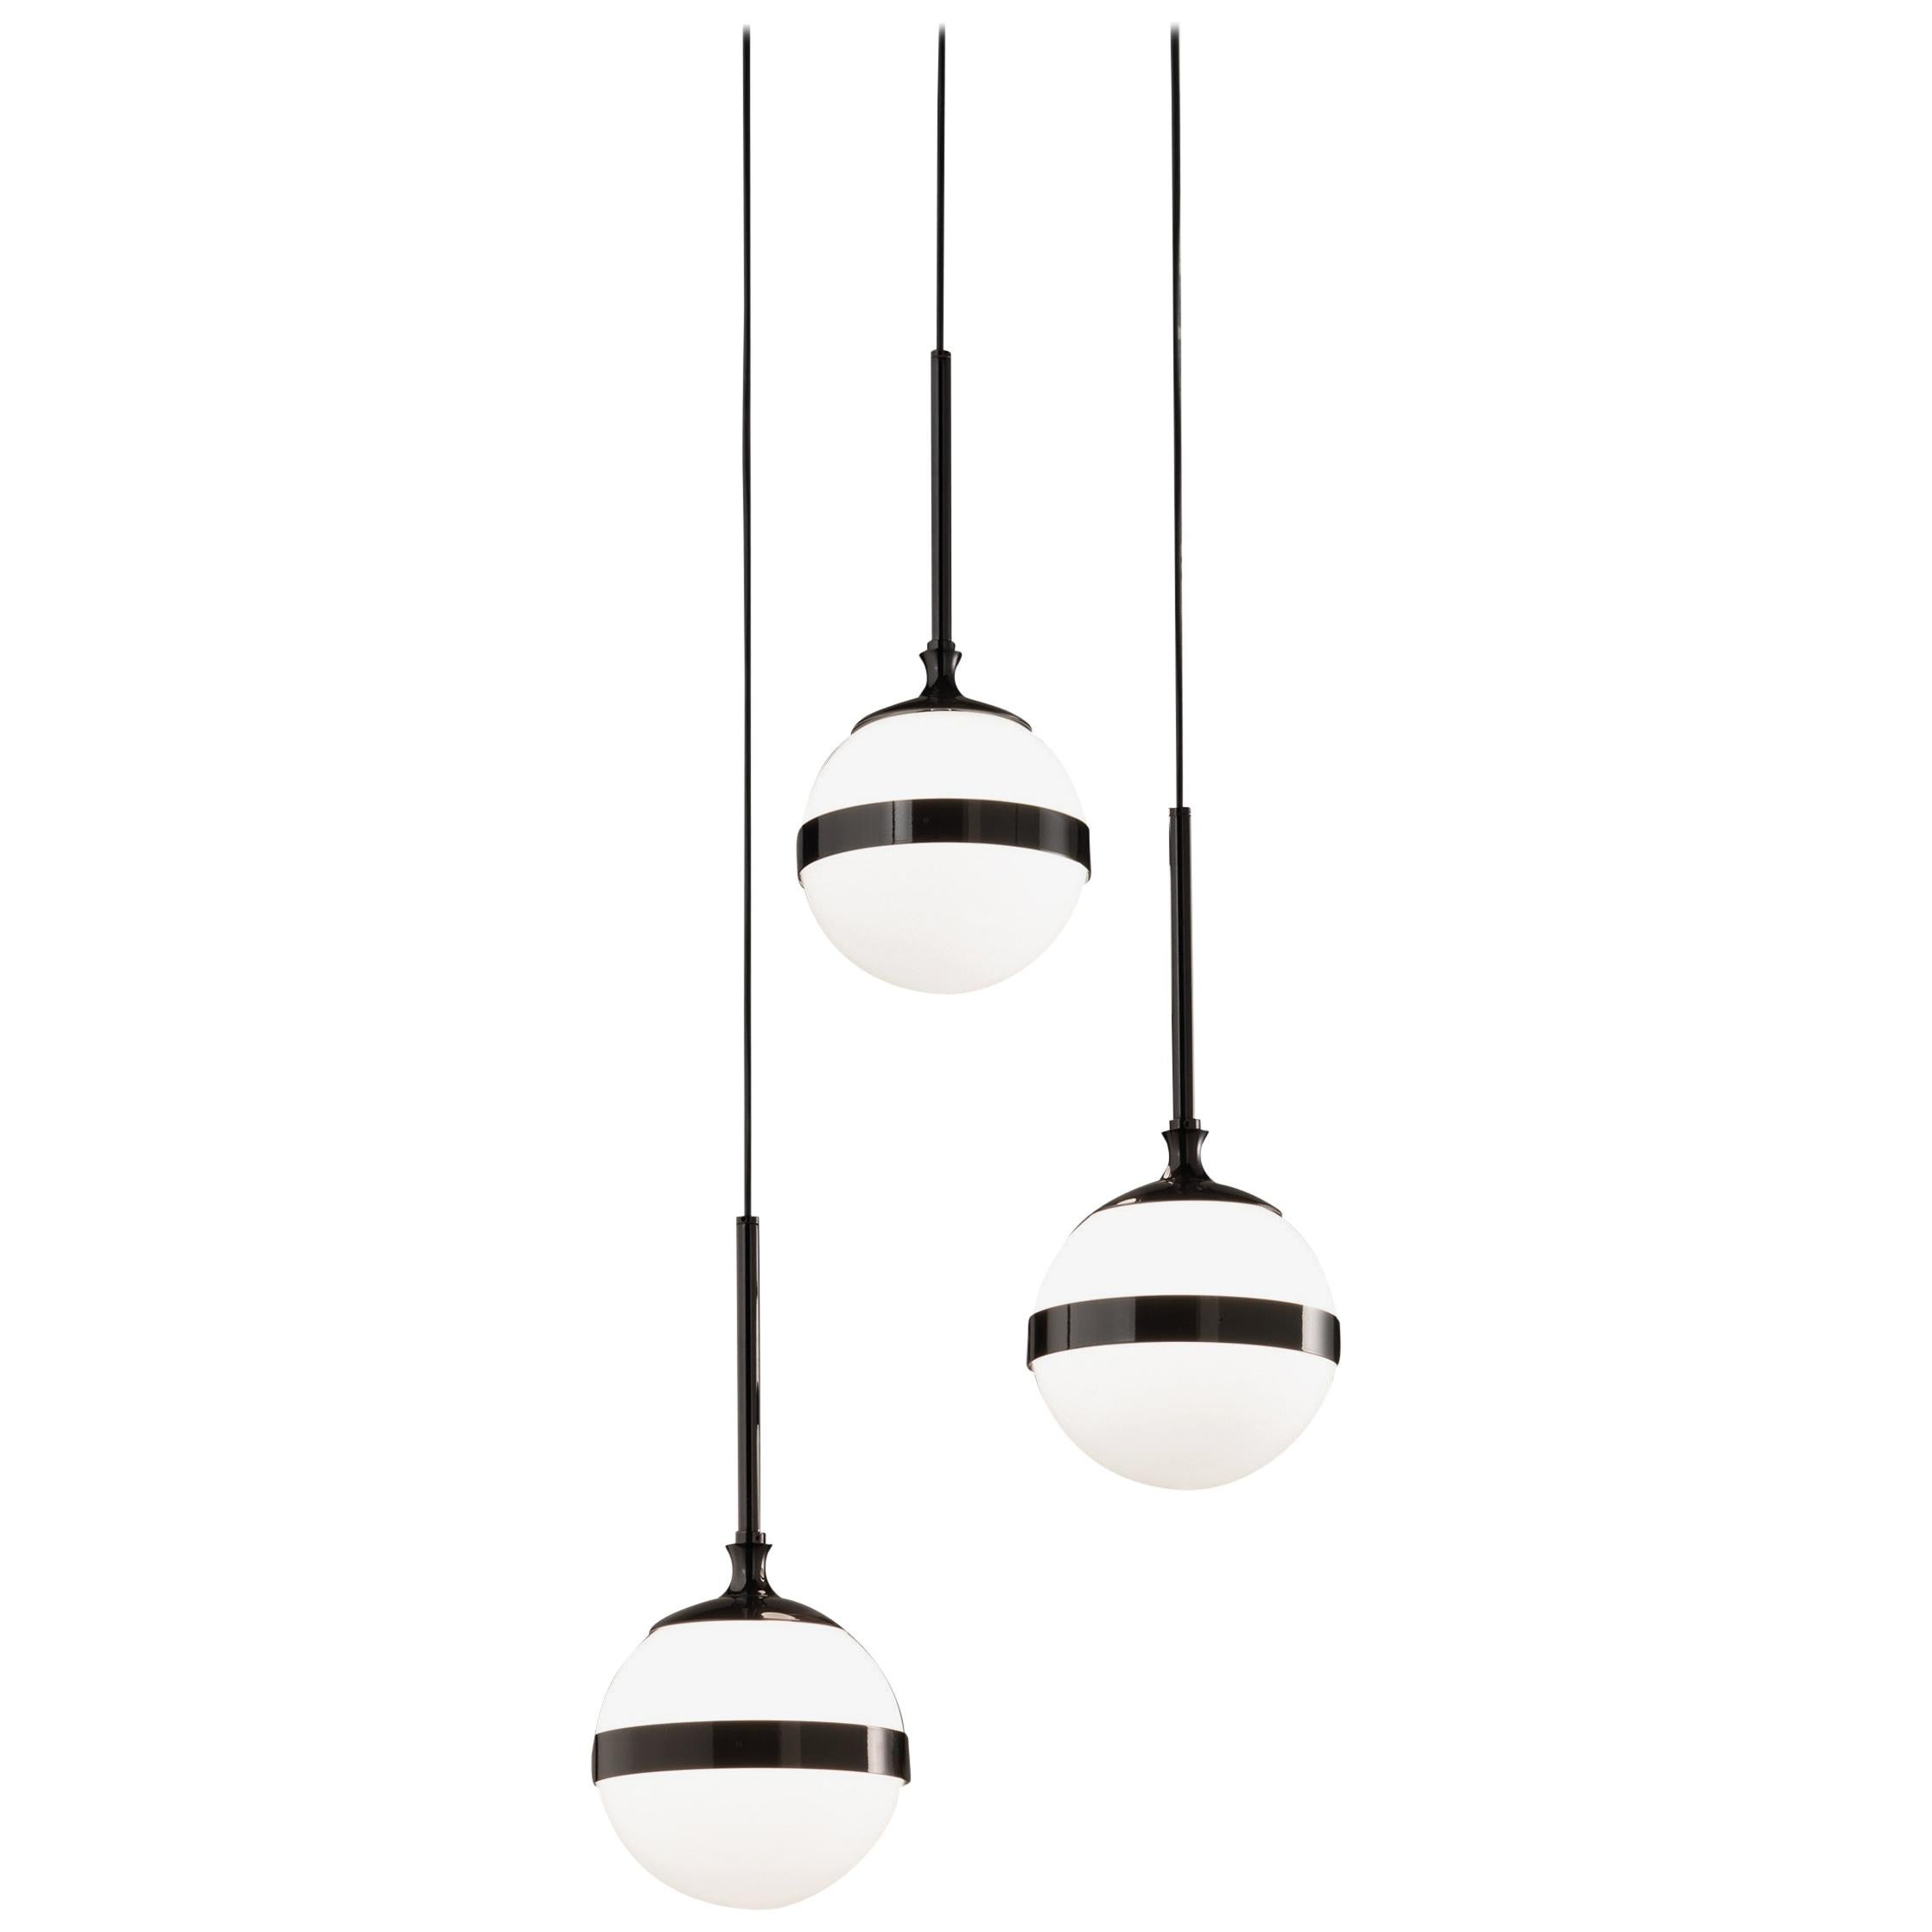 Vistosi Peggy SP Pendant Light in White and Black by Hangar Design Group  For Sale at 1stDibs